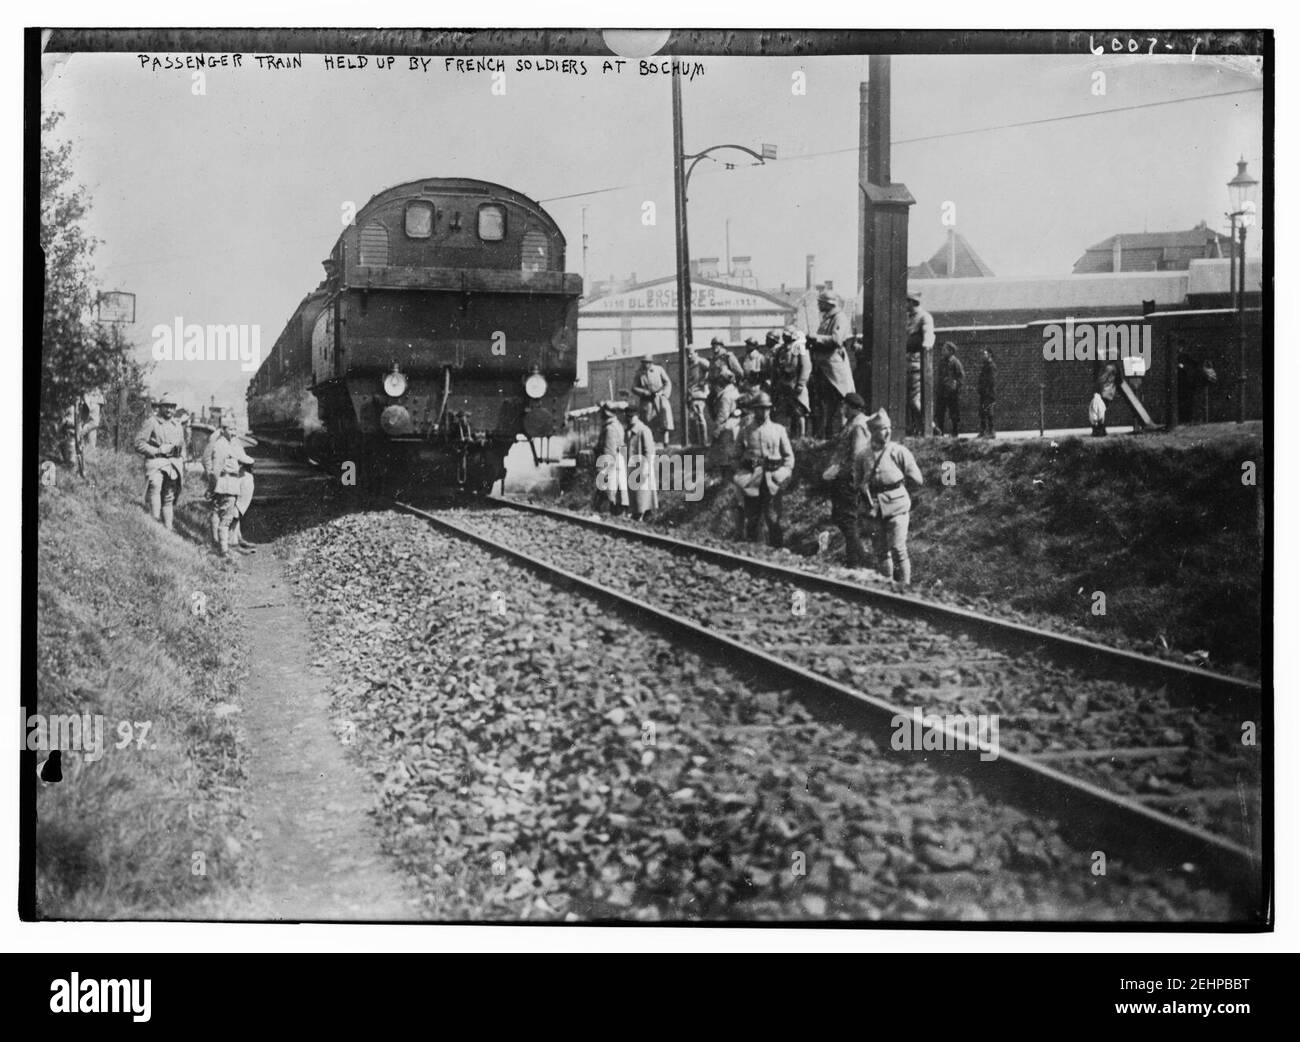 Passenger train held up by French soldiers at Bochum Stock Photo